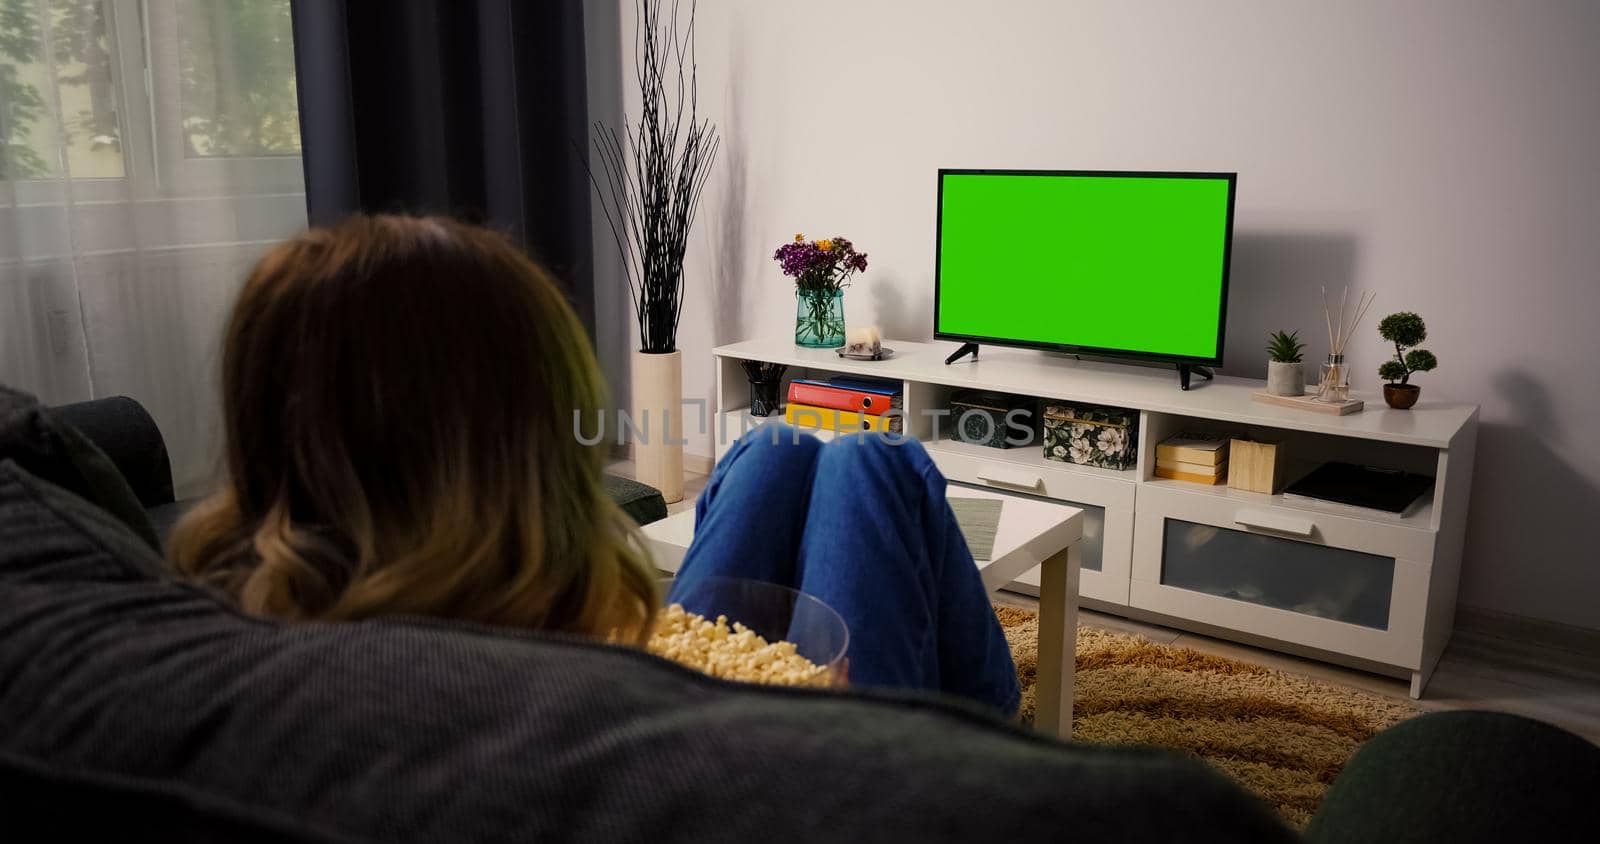 Woman Sitting on a Couch Home Watching Green Chroma Key Screen, by RecCameraStock